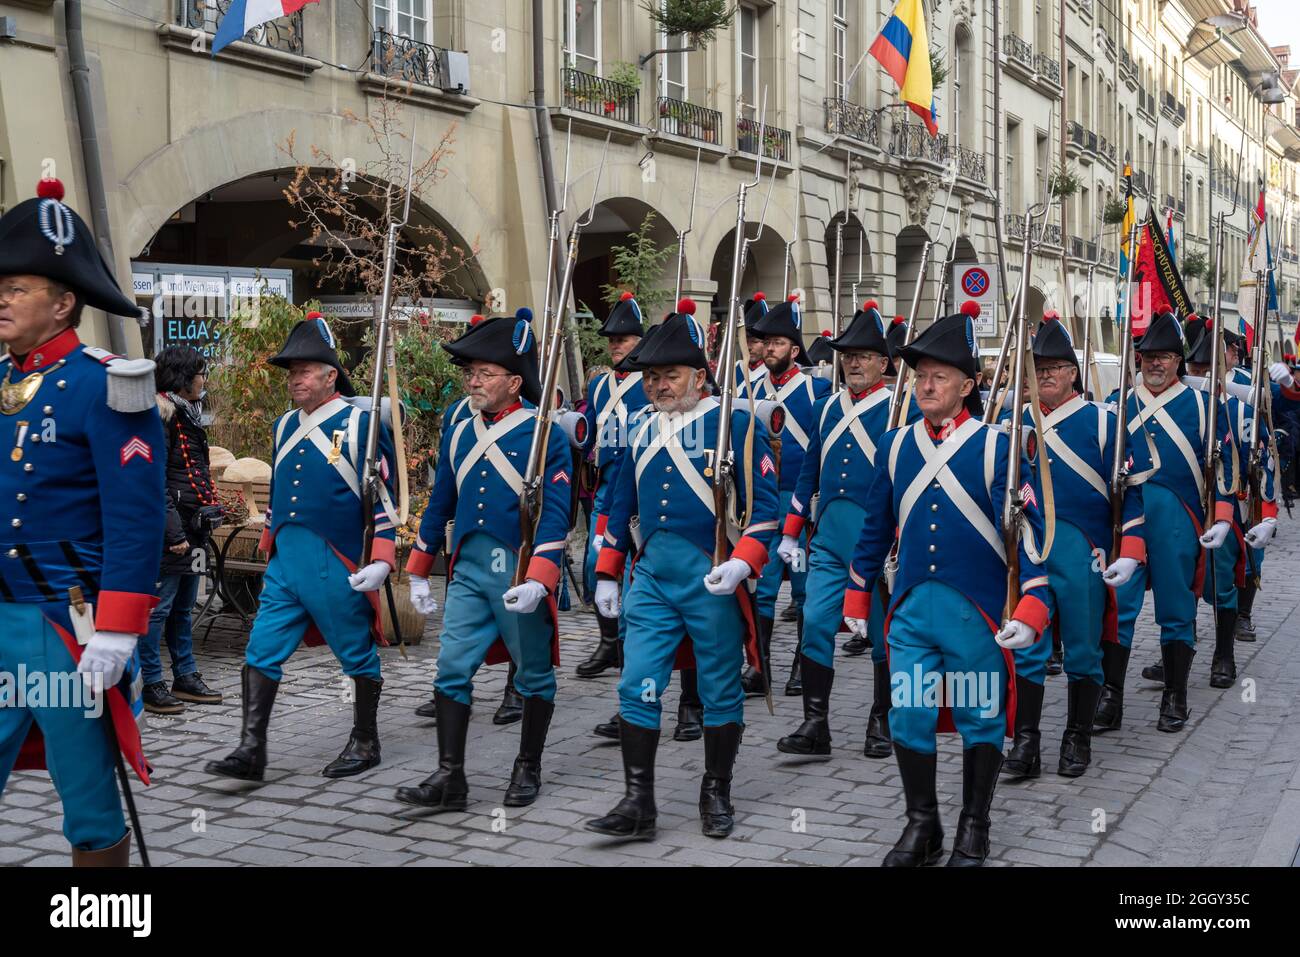 Parade of swiss soldiers on traditional costume during Zibelemarit Holiday (Onion Market) - Bern, Switzerland Stock Photo